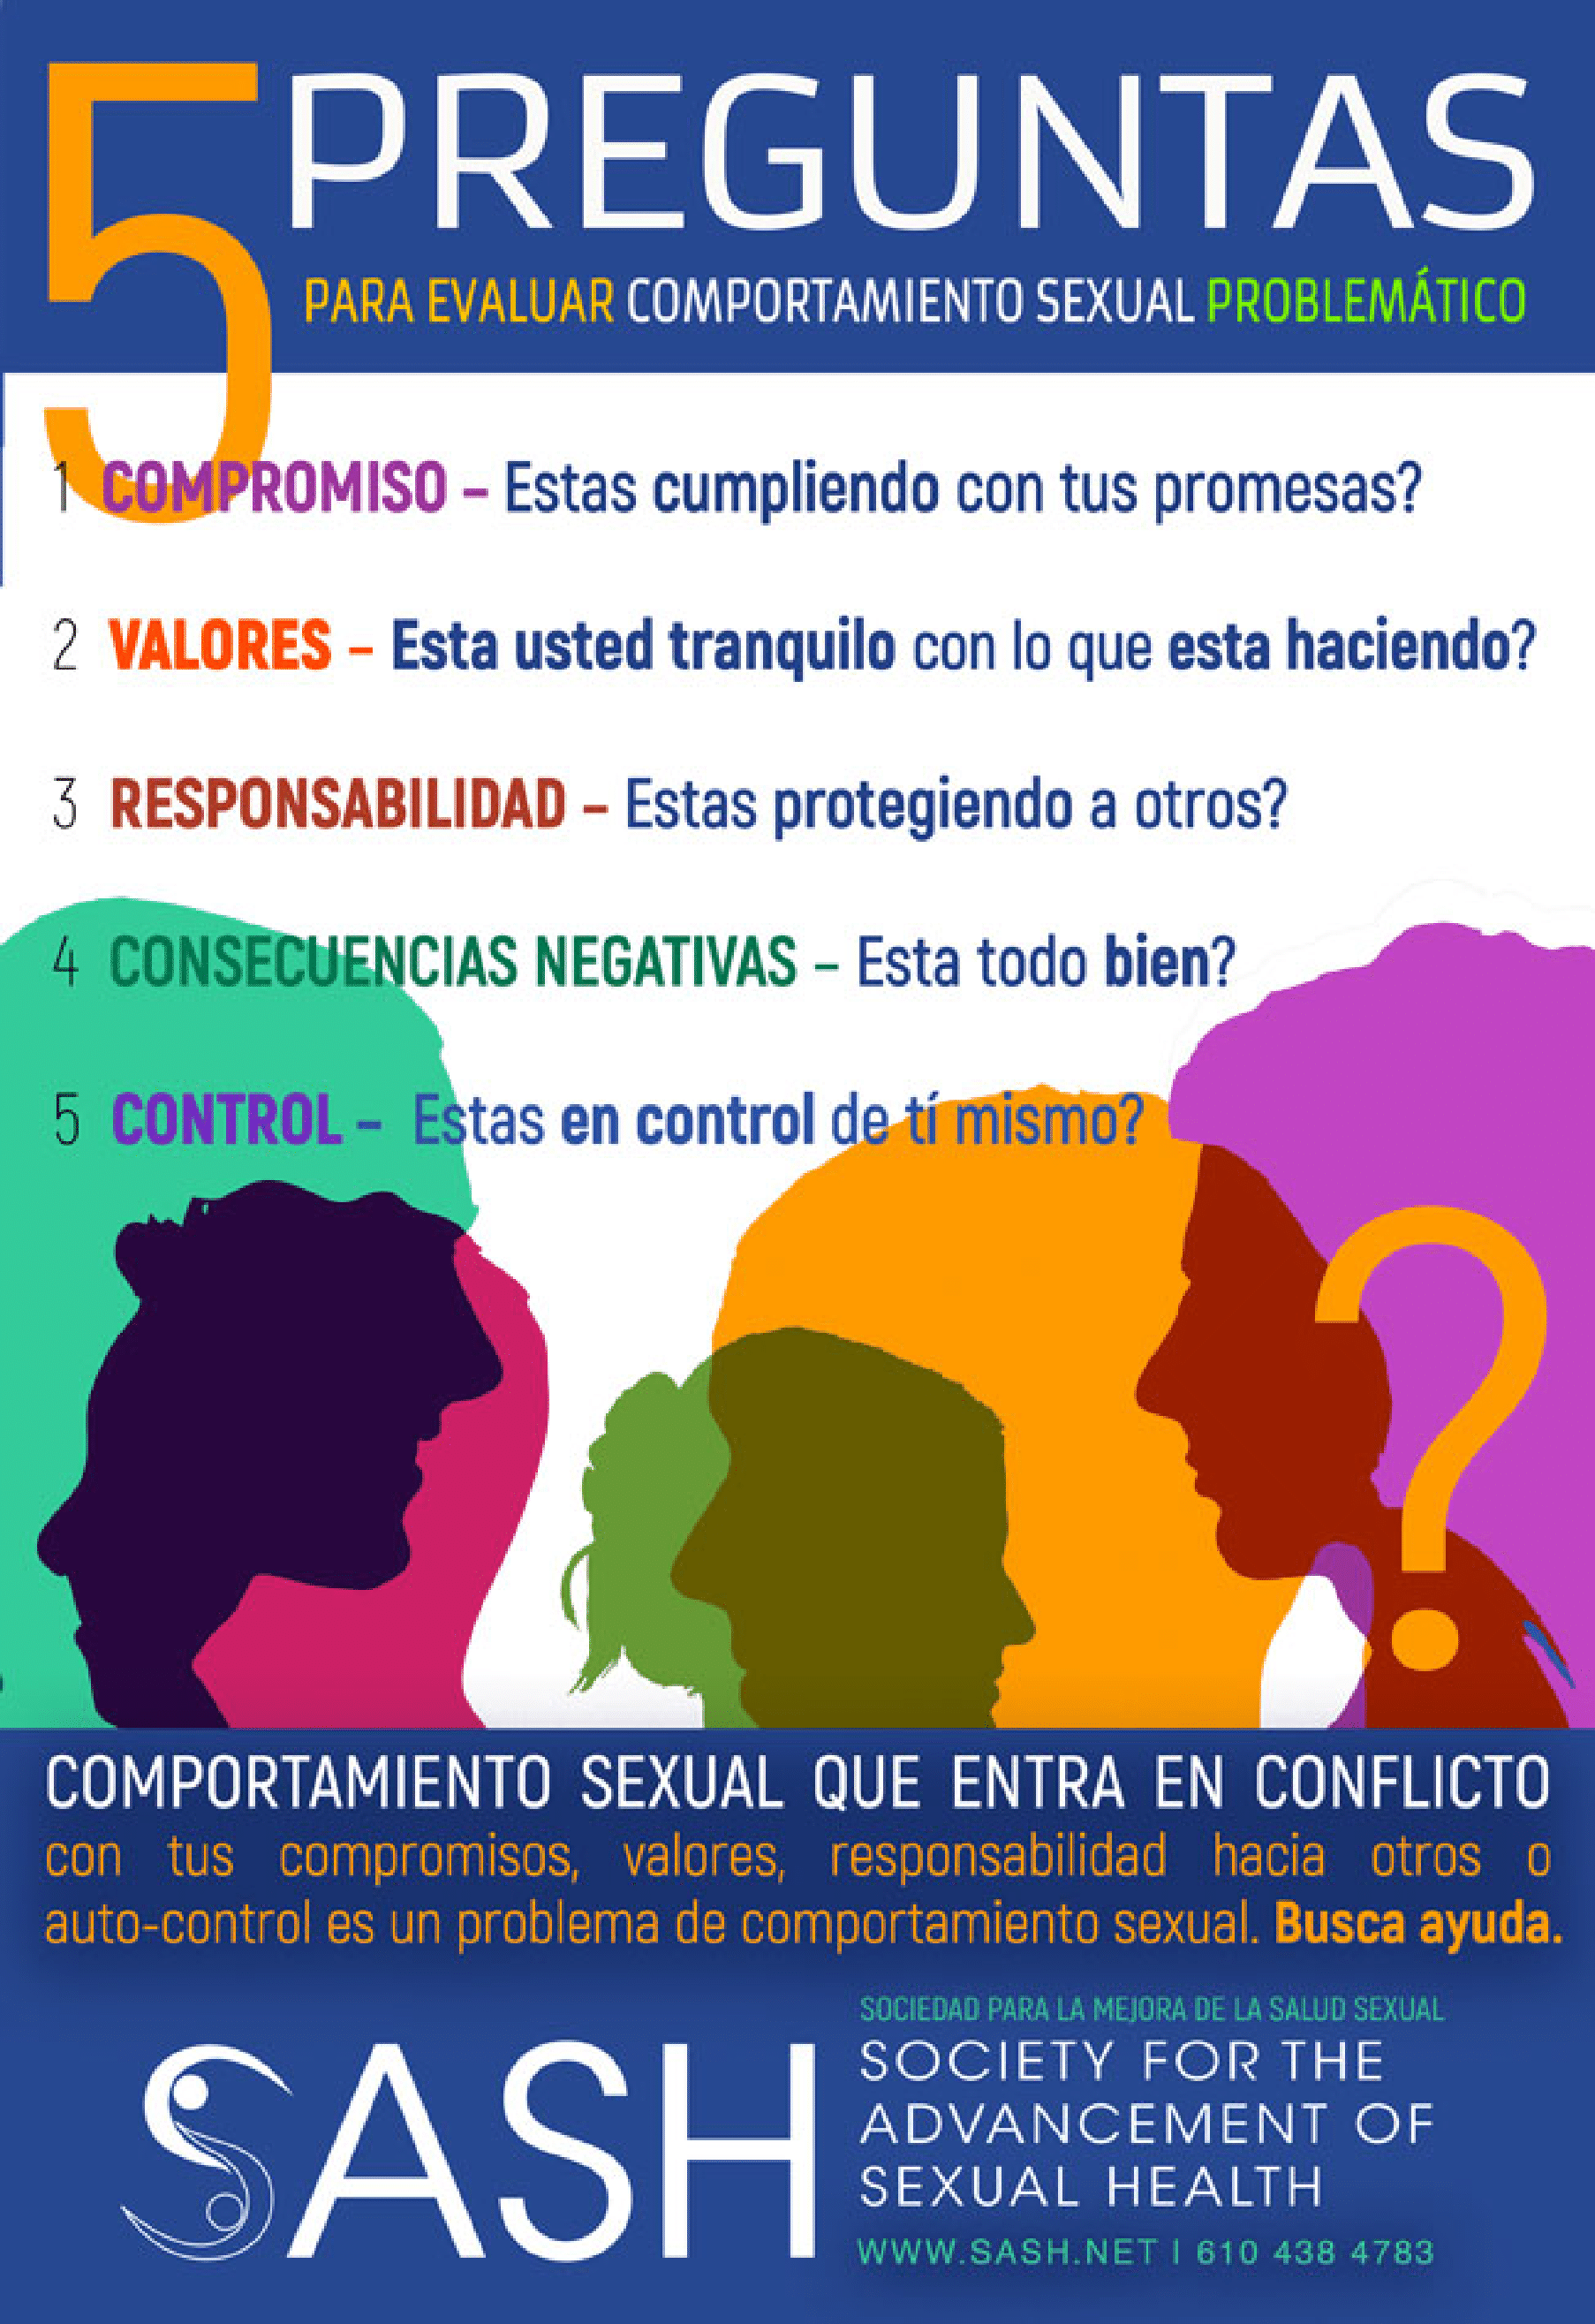 Spansih - 5 Questions to Asses Problematic Sexual Behavior